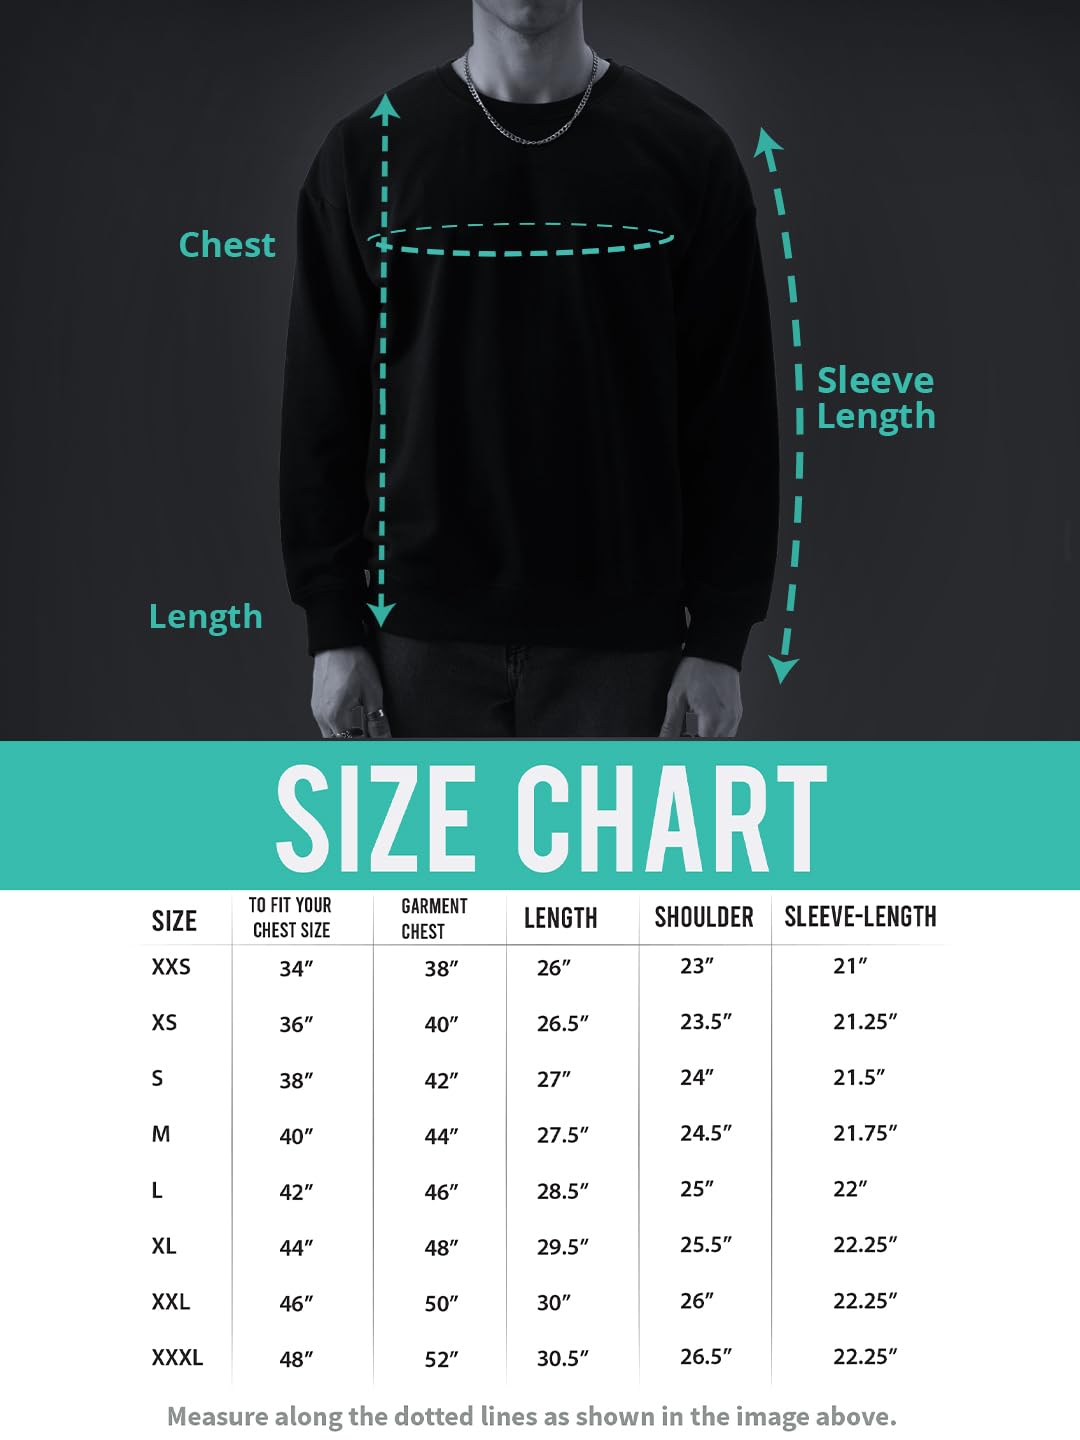 The Souled Store Solids: Bottle Green Men Oversized Sweatshirts Sweatshirts Hoodies Pullovers Crewneck Hooded Zip-Up Graphic Printed Solid Color Block Sportswear Casual Warm Cozy Comfortable Winter